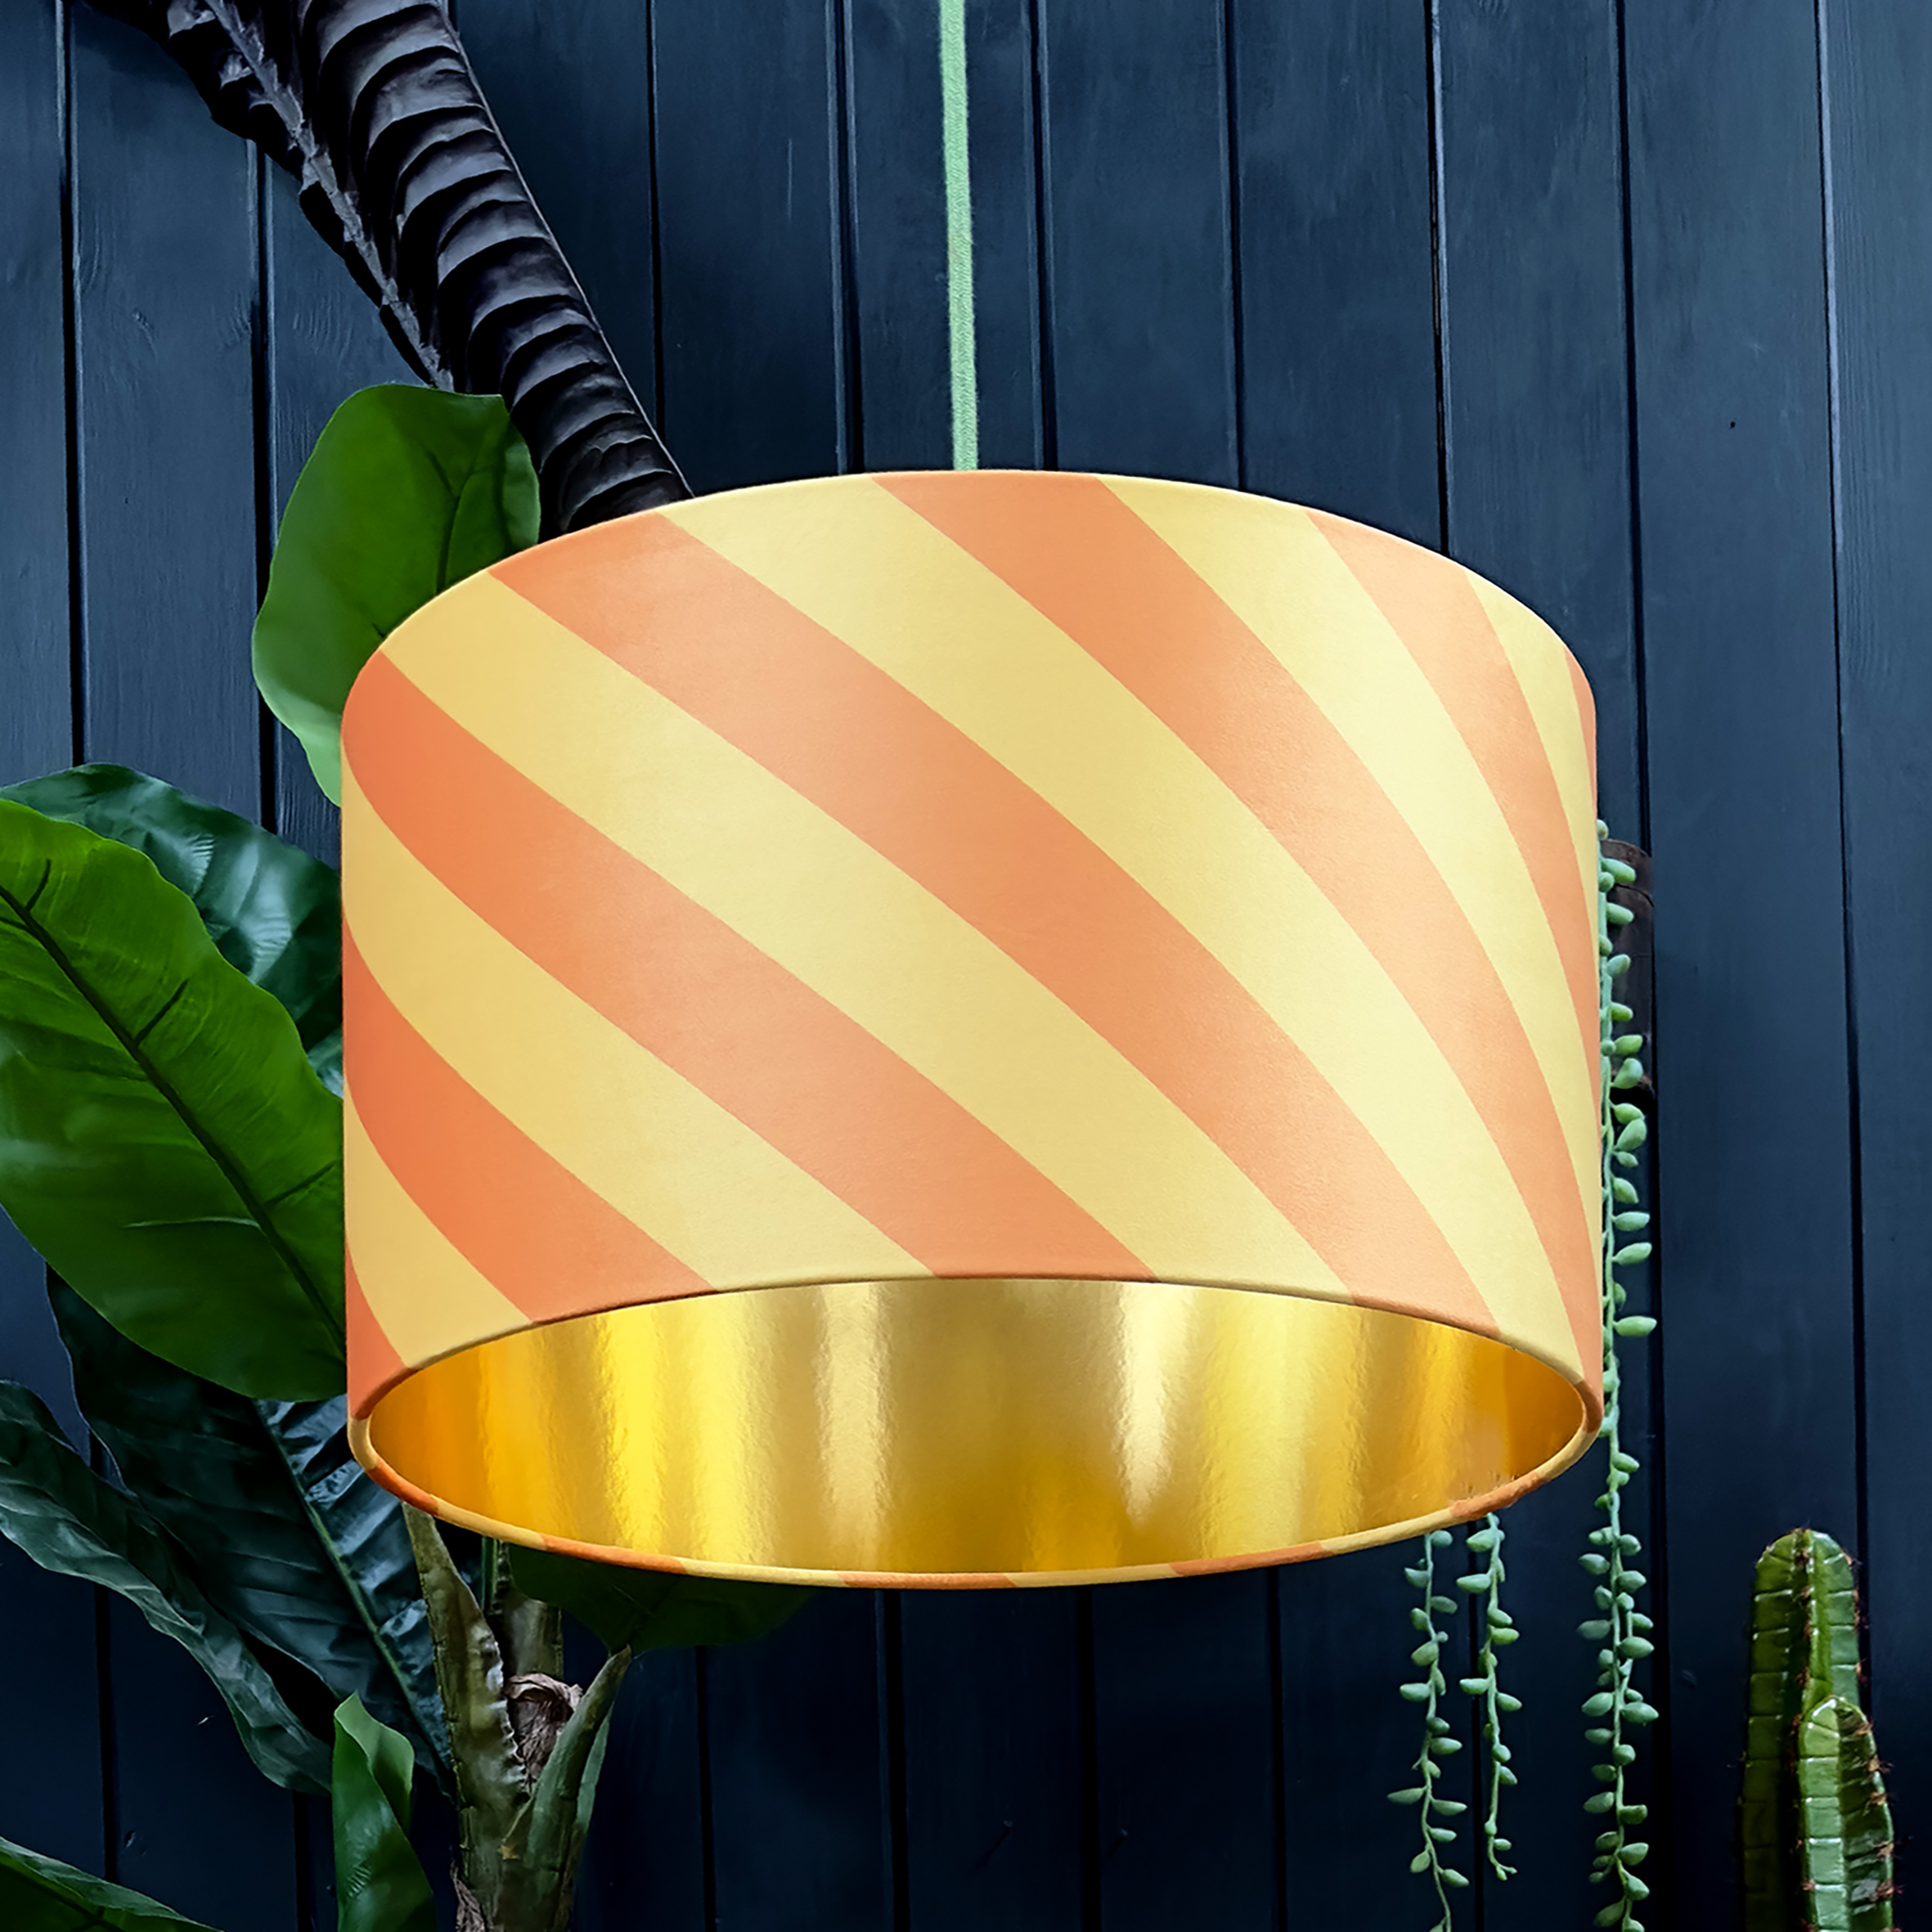 love frankie Helter skelter lampshade in marmalade with gold lining